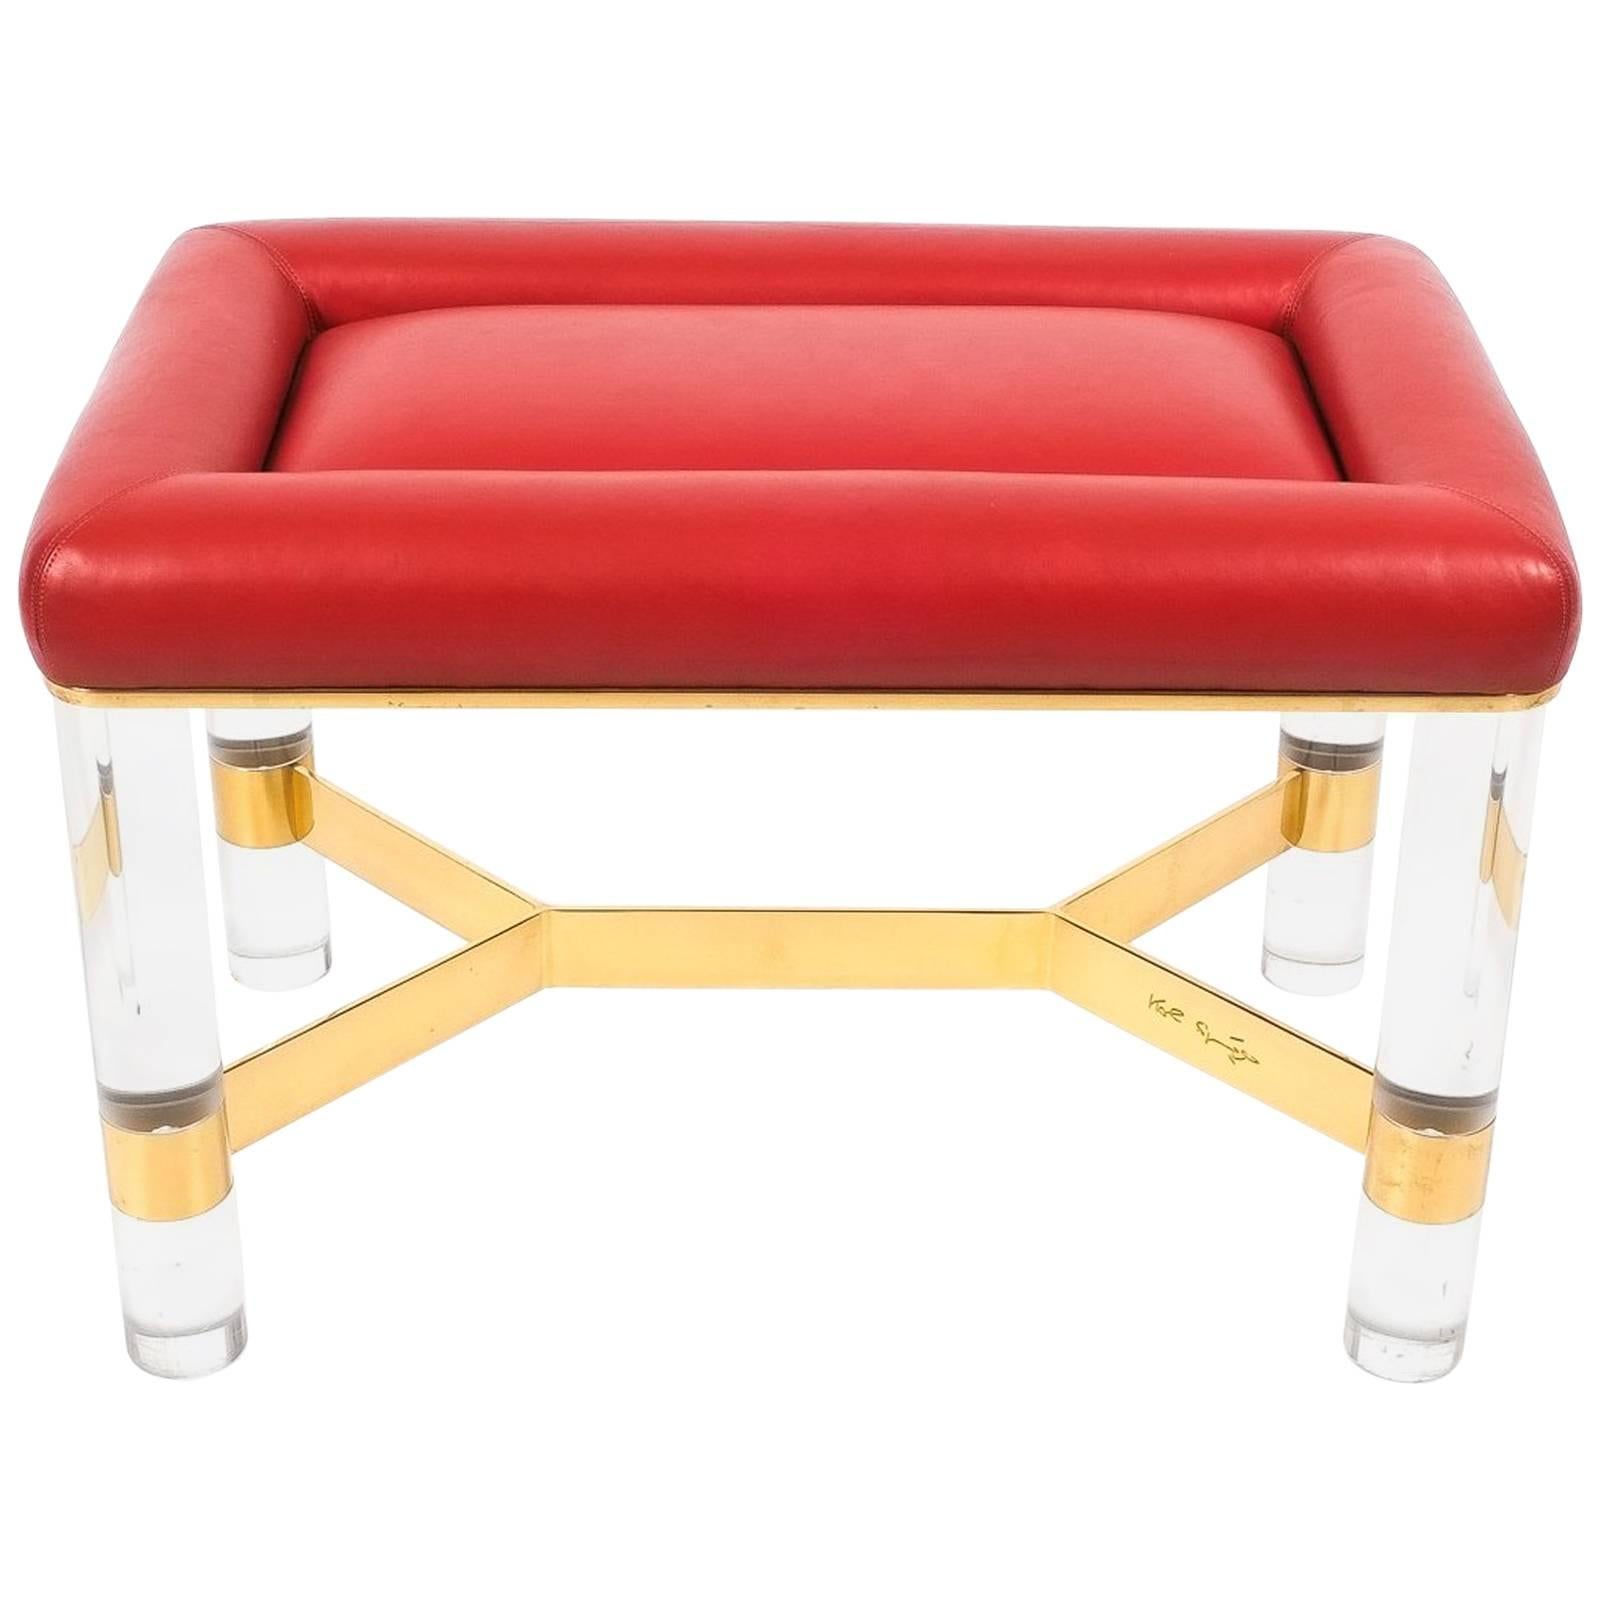 Very desirable small bench or stool by Karl Springer, 1970 in excellent condition. Luxe red leather upholstery with a base made from solide cylindric Lucite legs with polished brass cross barre. Very stylish piece, signed.

